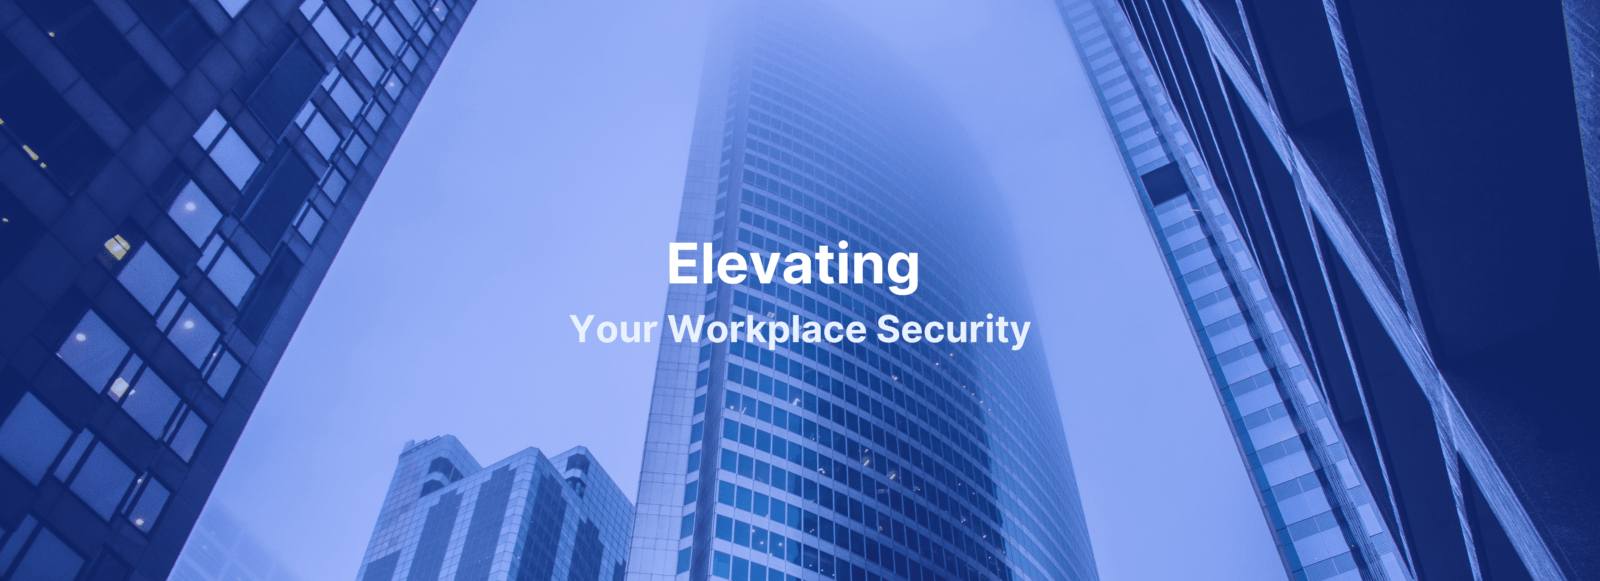 Elevating Your Workplace Security_Banner.